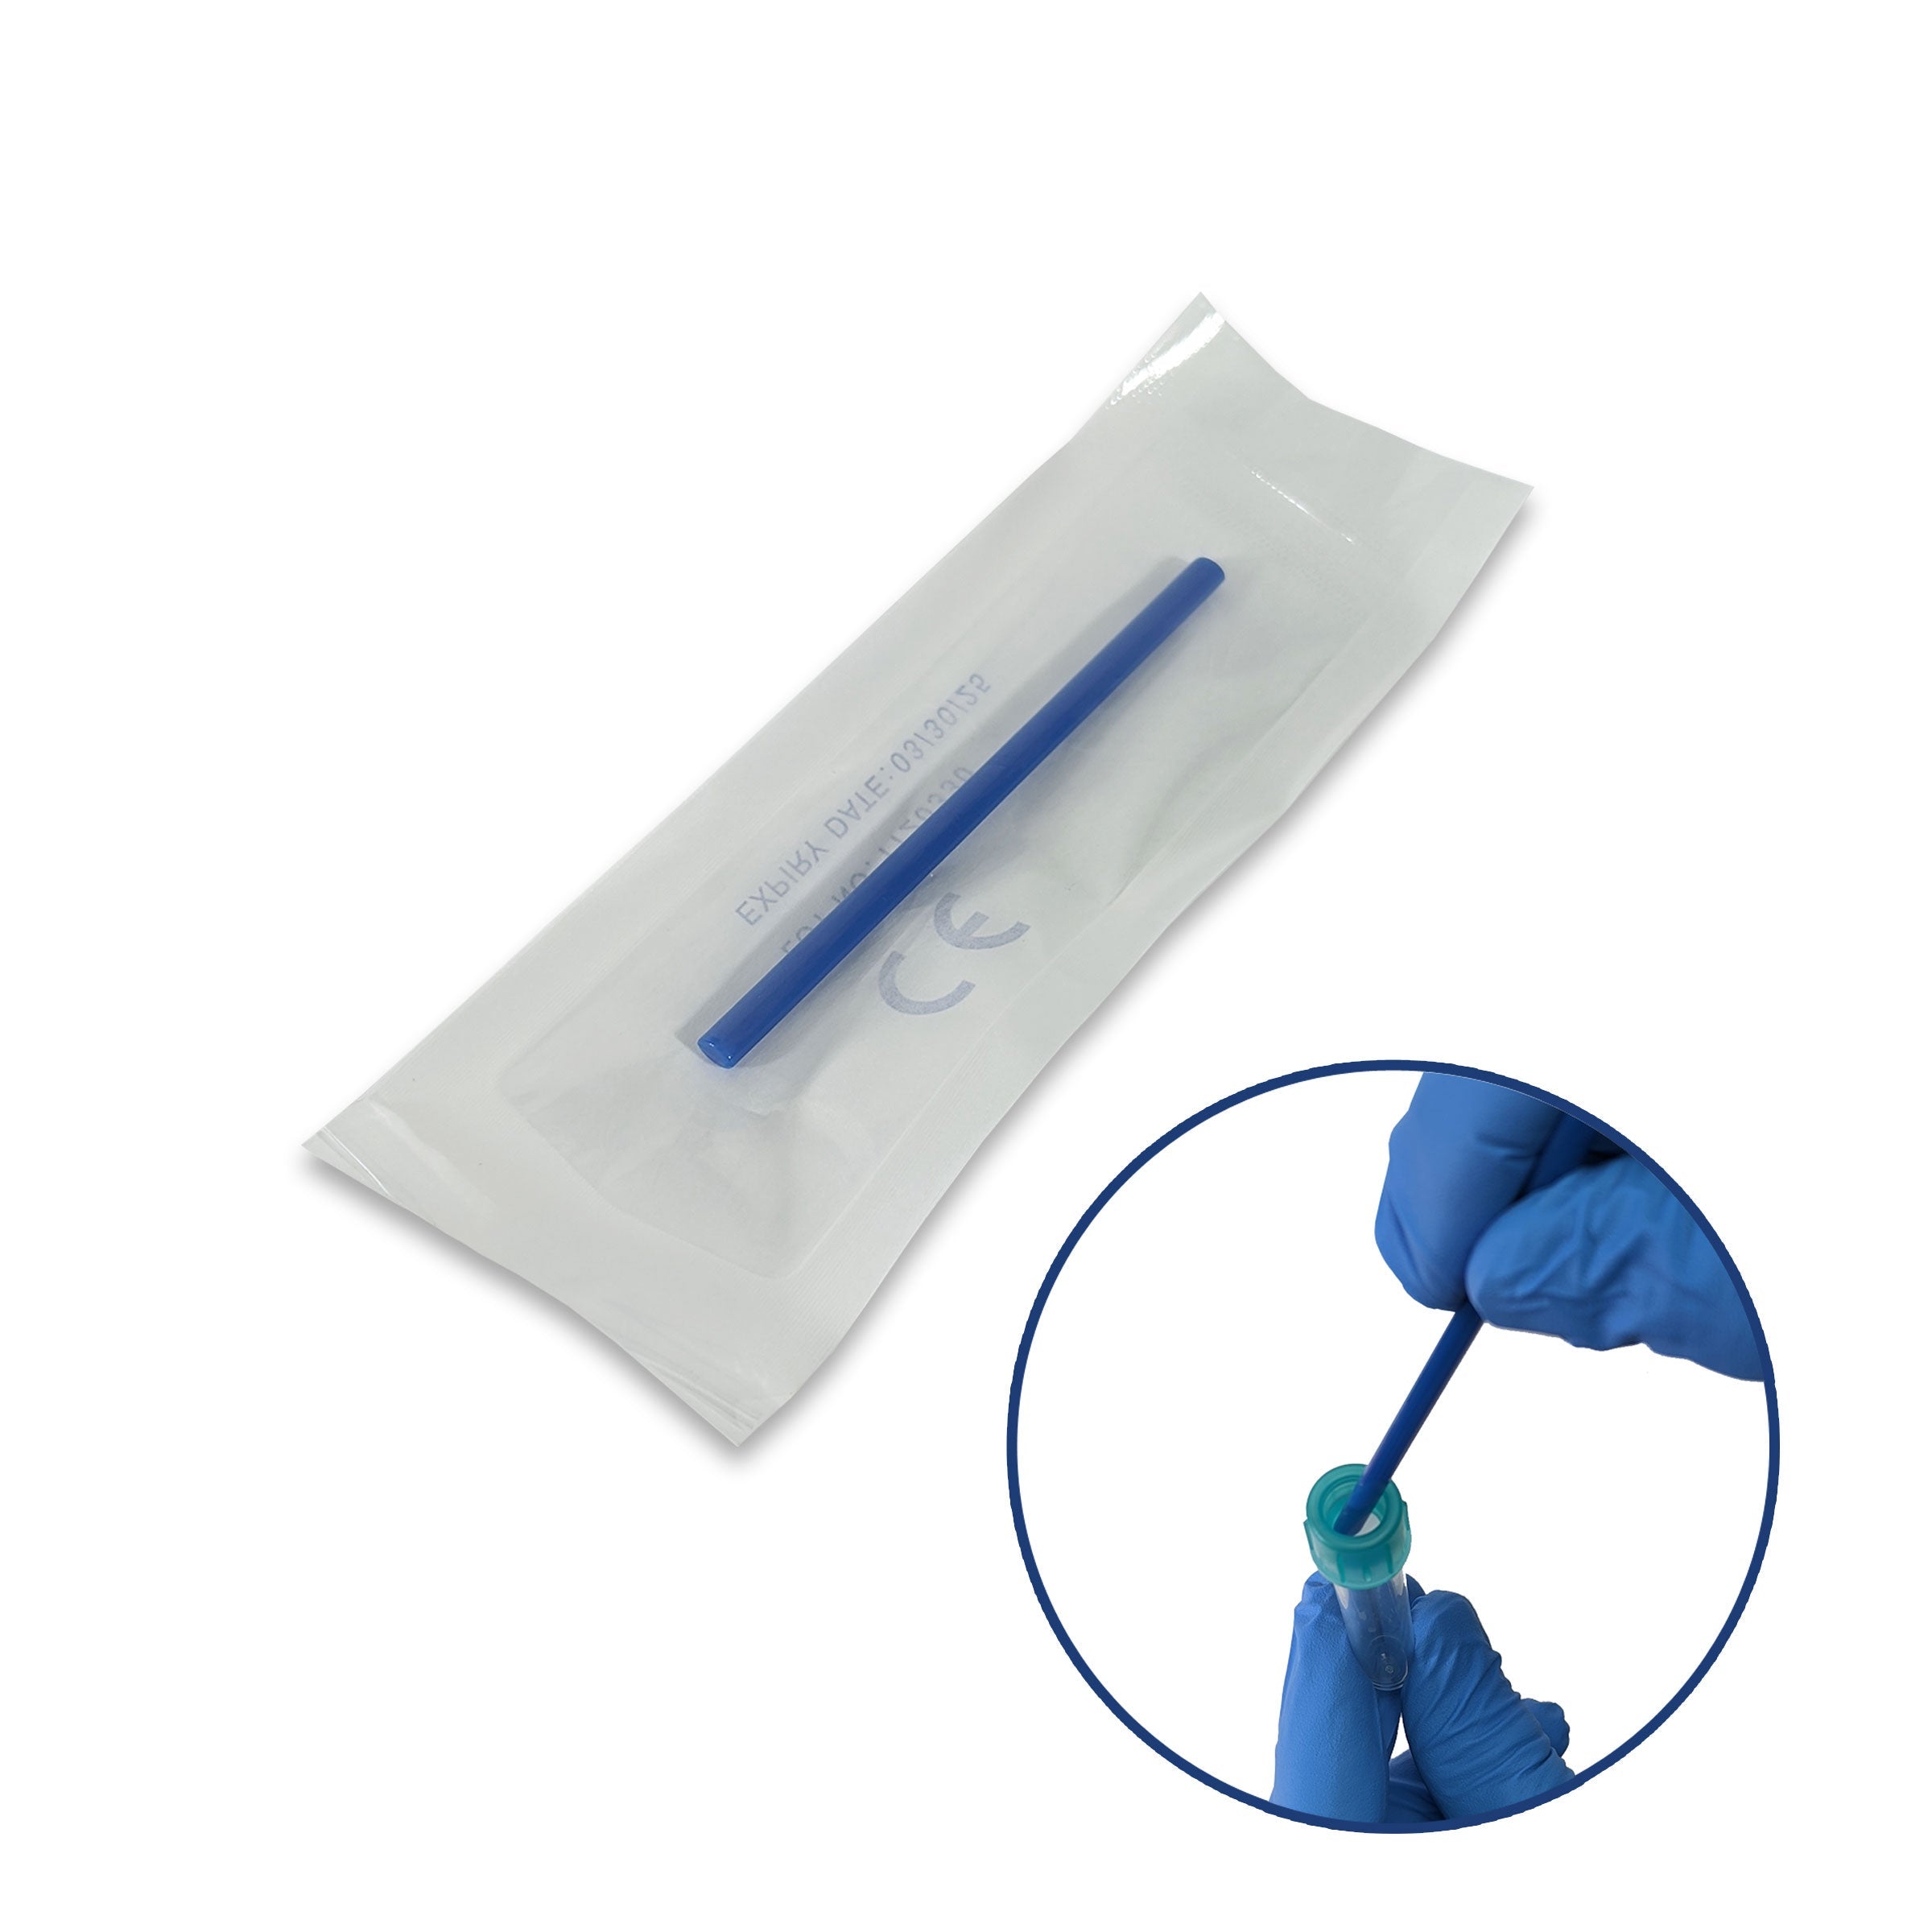 MTC Bio T9045, Pestle for Flowtubes, for Use with 35µm Strainer Caps, Sterile, Individually Wrapped, 100/pk